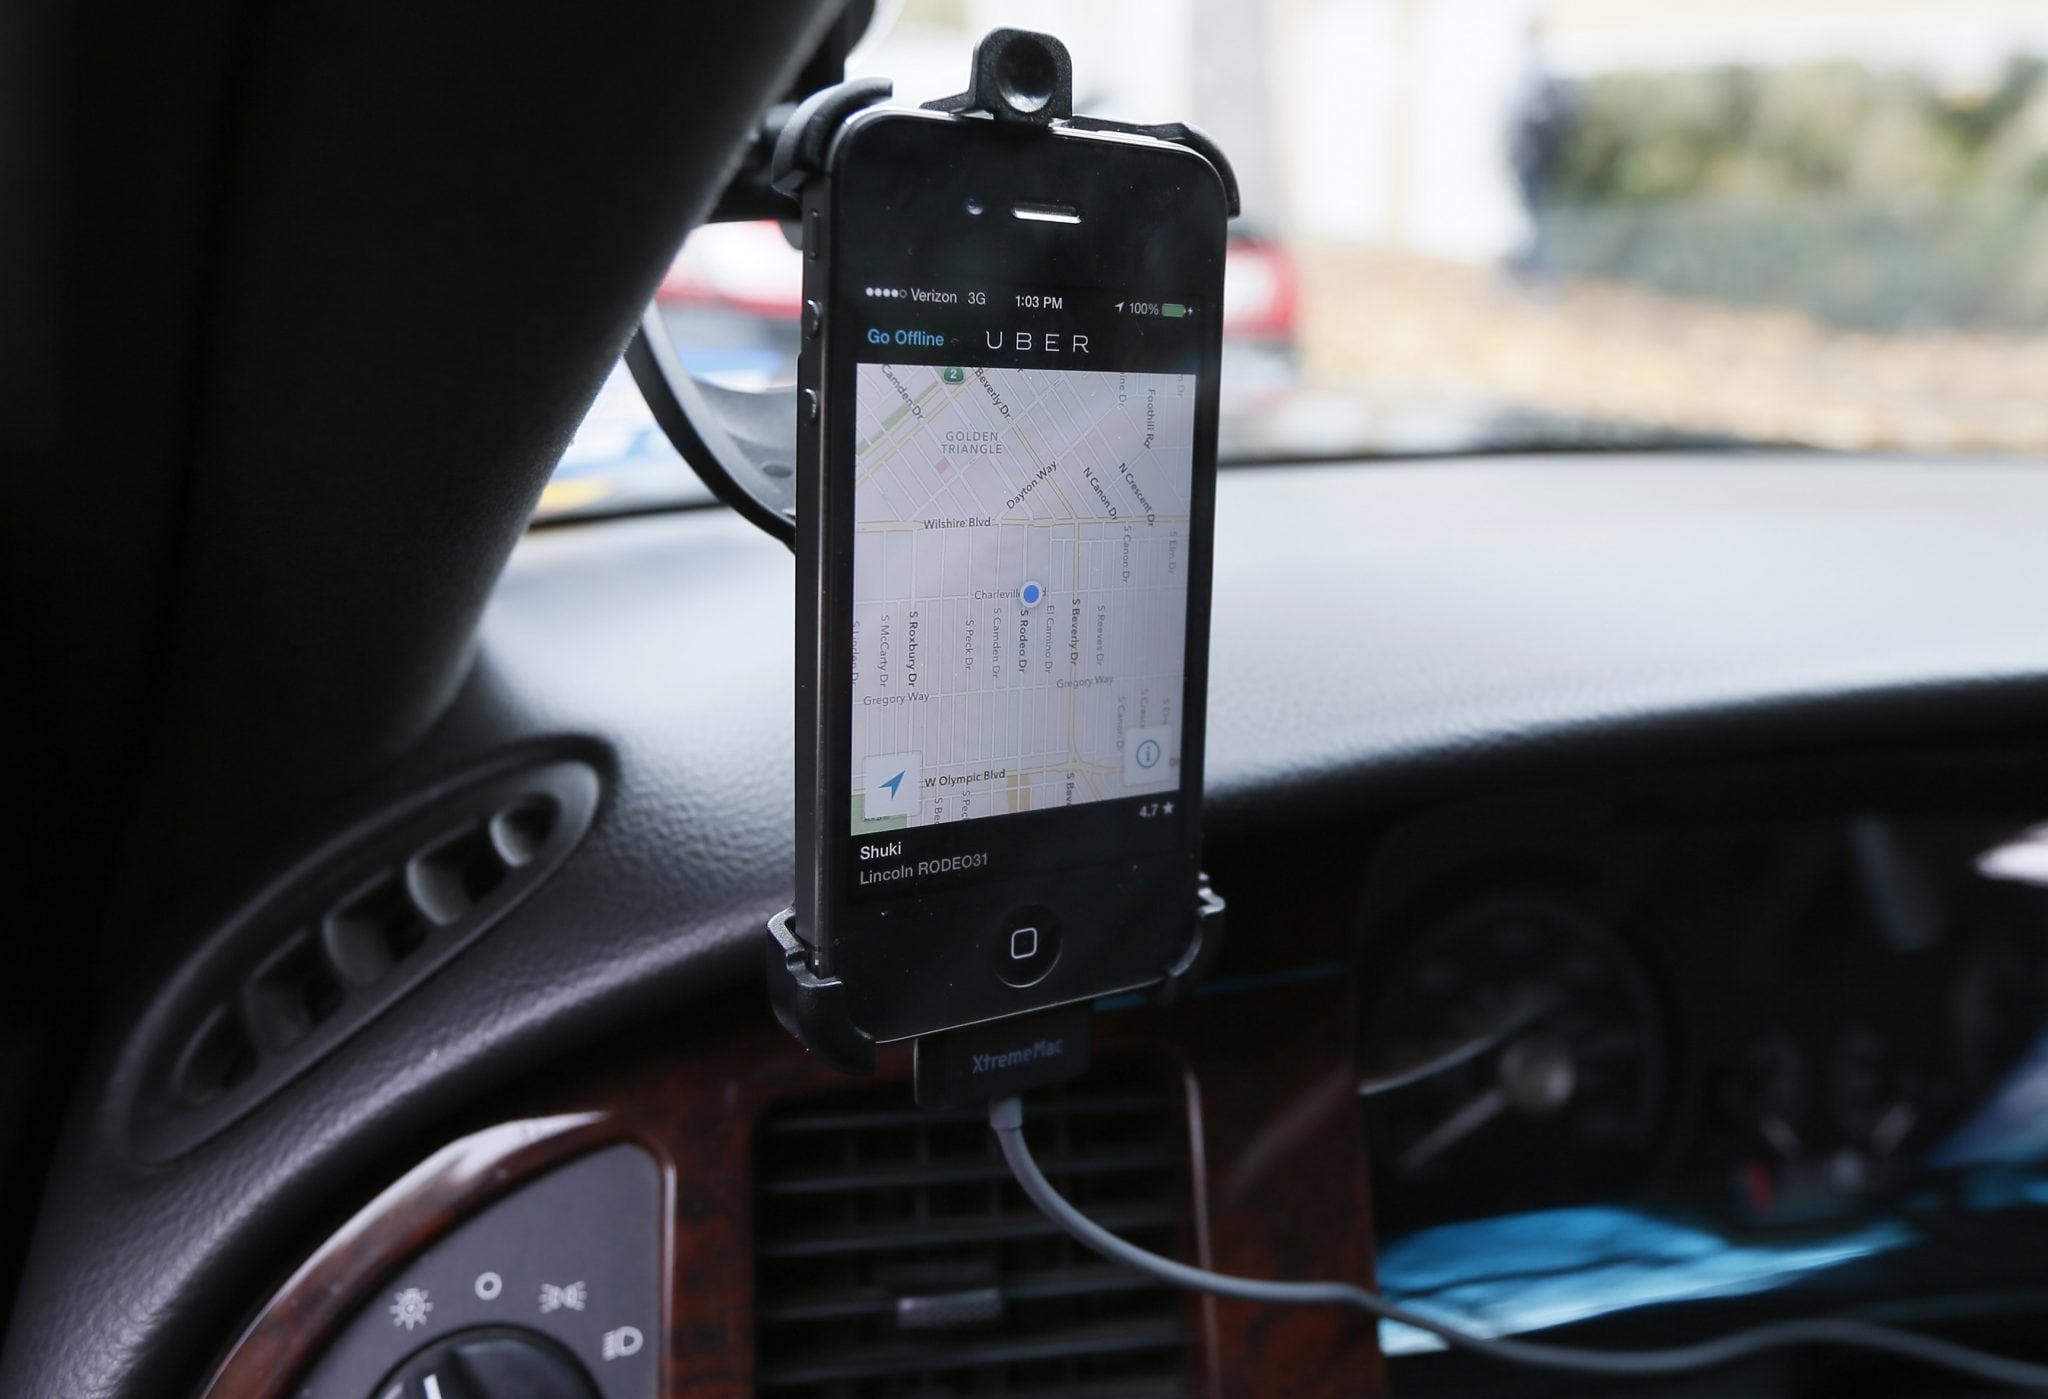 Transportation app Uber is seen on the iPhone of limousine driver. 